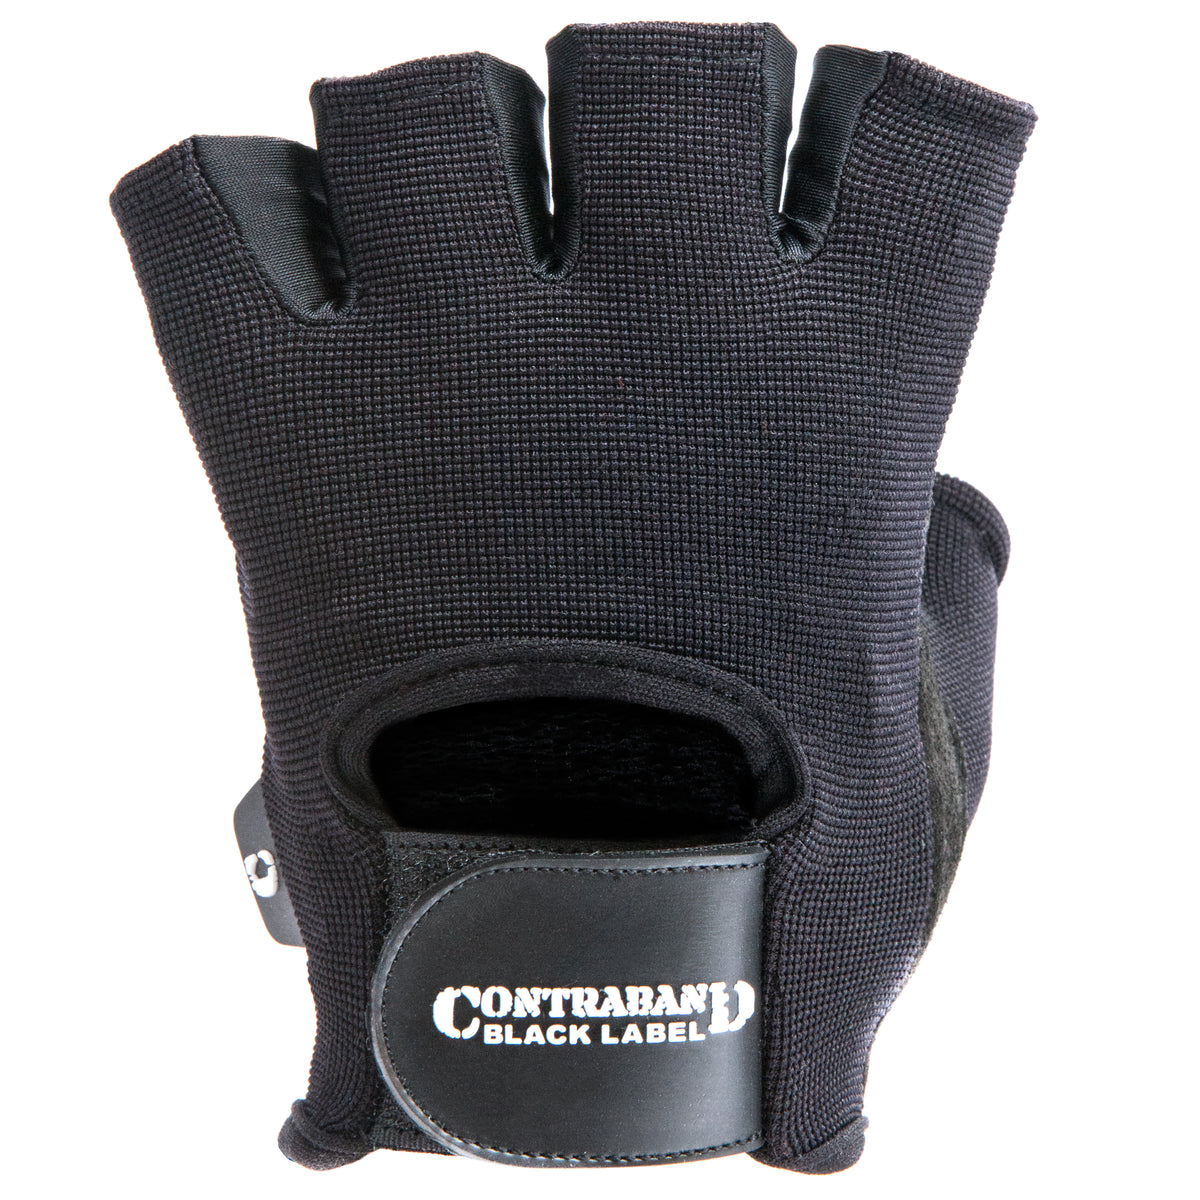 Contraband Black Label 5050 Basic Weight Lifting Gloves